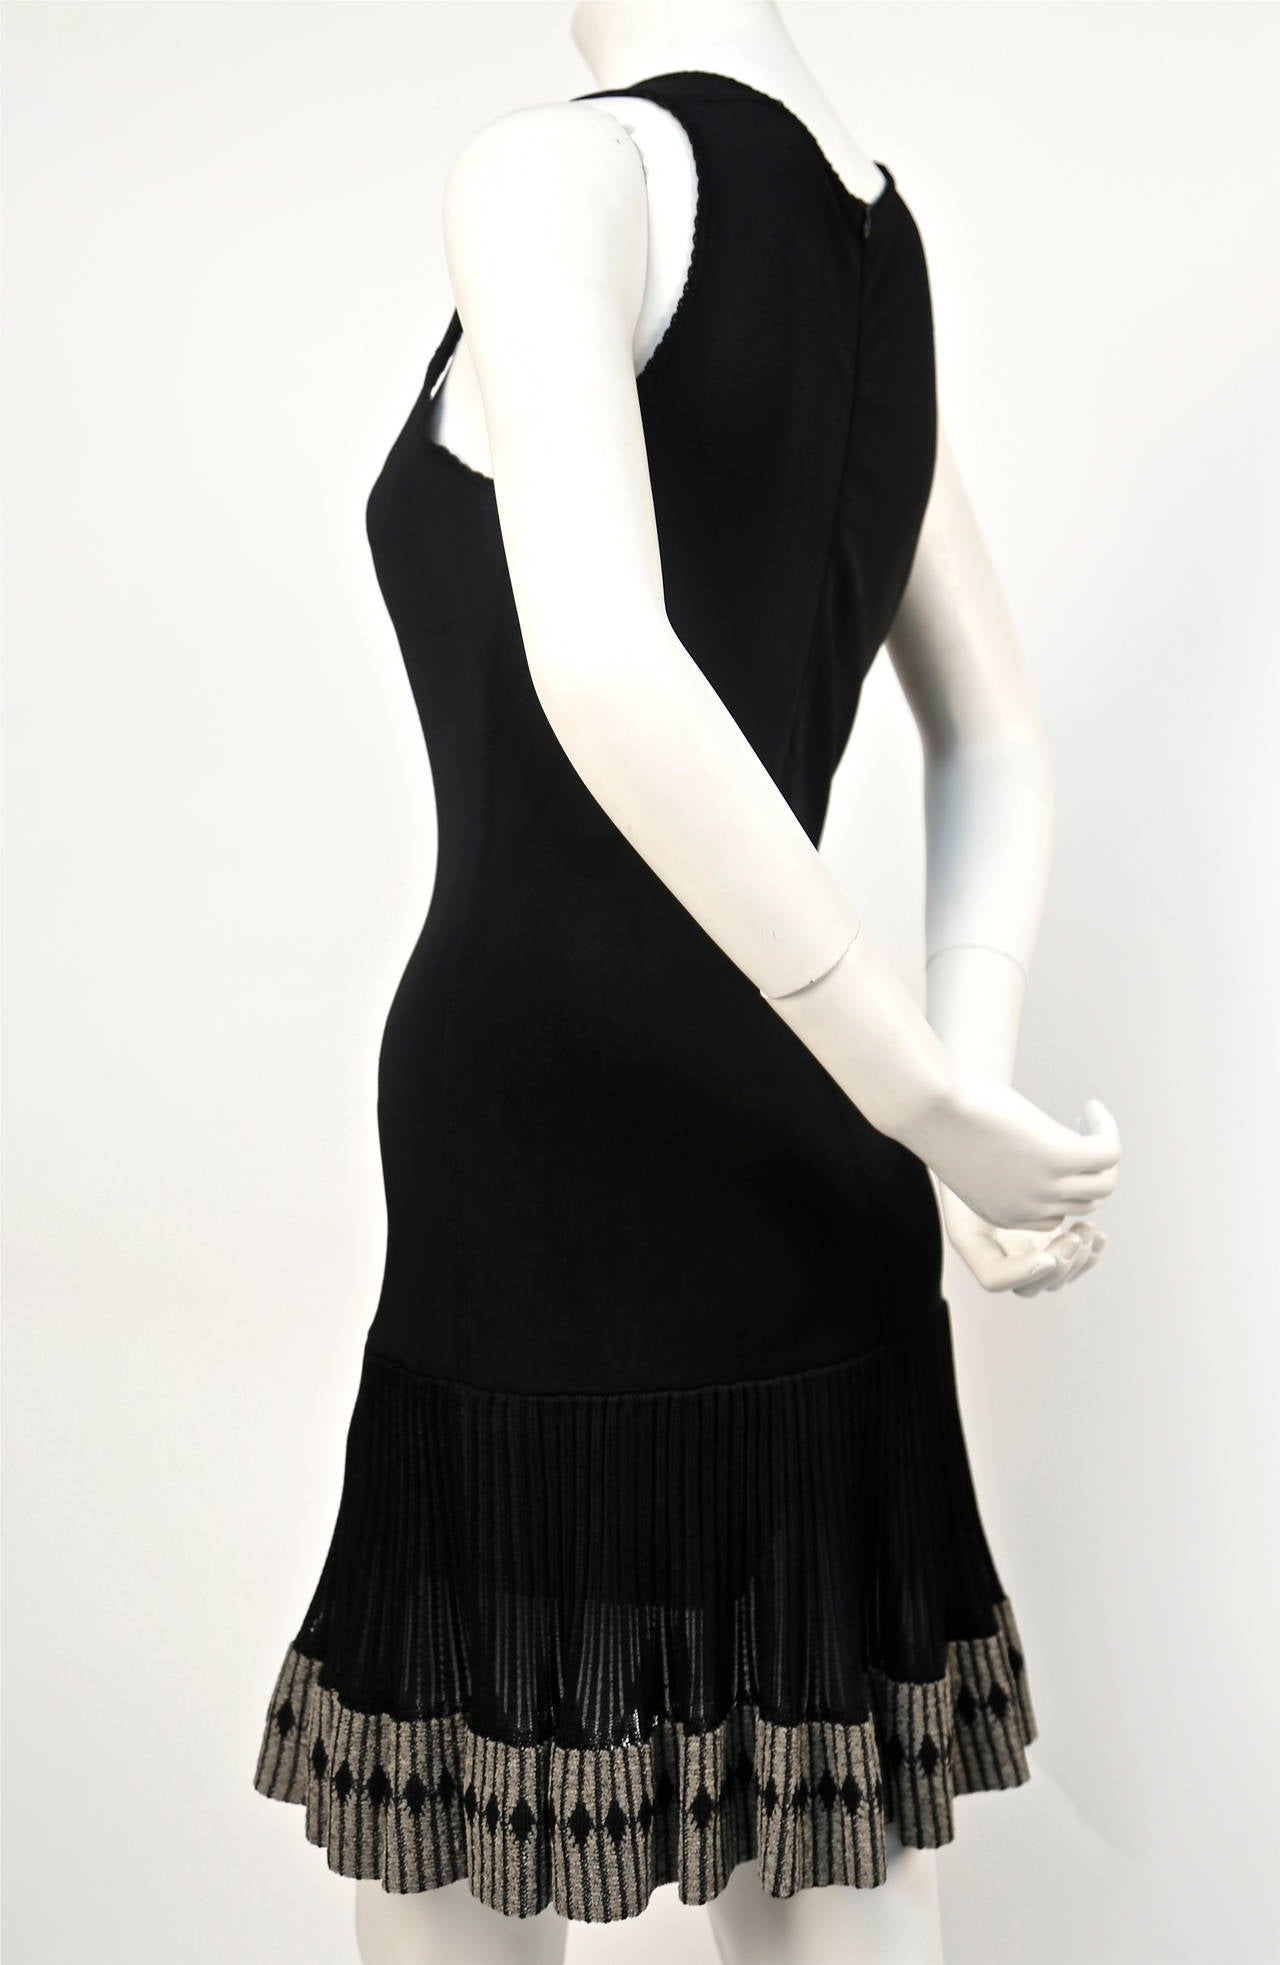 Very rare jet black dress with scalloped trim and semi sheer skirt with decorative diamond embroidered hemline from Azzedine Alaia dating to the early 1990's, Dress is labeled a size S however this could easily fit a size M. Zips up back with